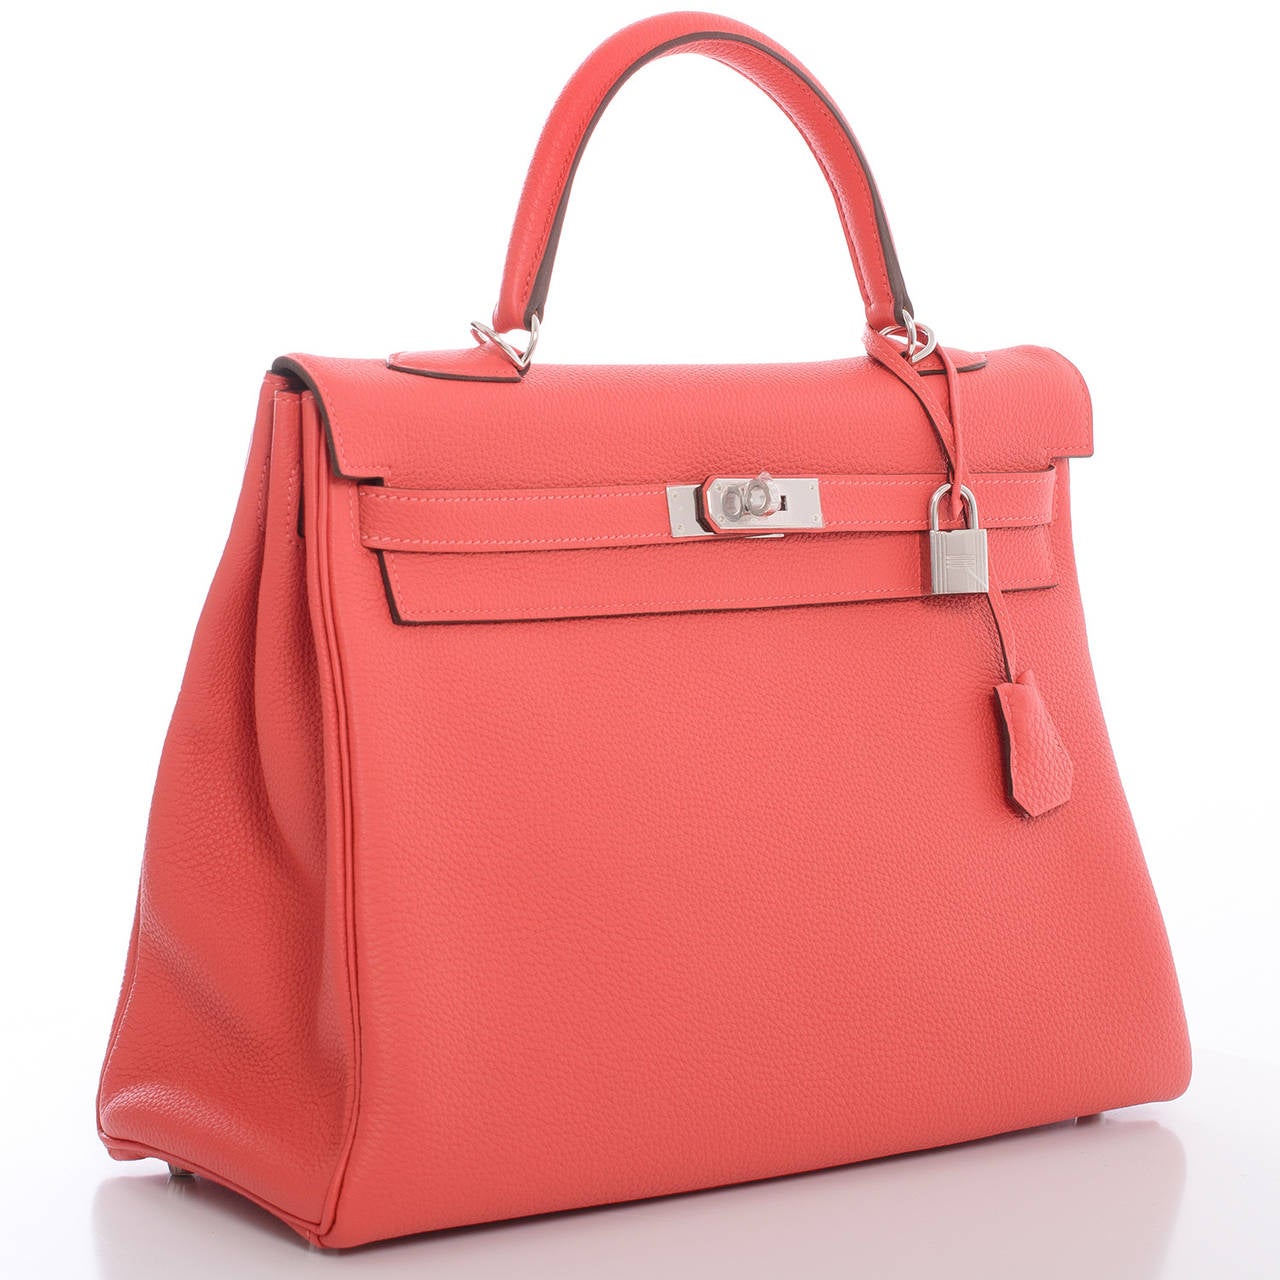 Hermes Rouge Pivoine Kelly 35cm in rich togo (bull) leather with palladium hardware.

The Hermes Kelly bag, like its sister bag -- the Birkin -- is a coveted and scarce bag. Like its muse, Grace Kelly, this bag is the definition of timeless